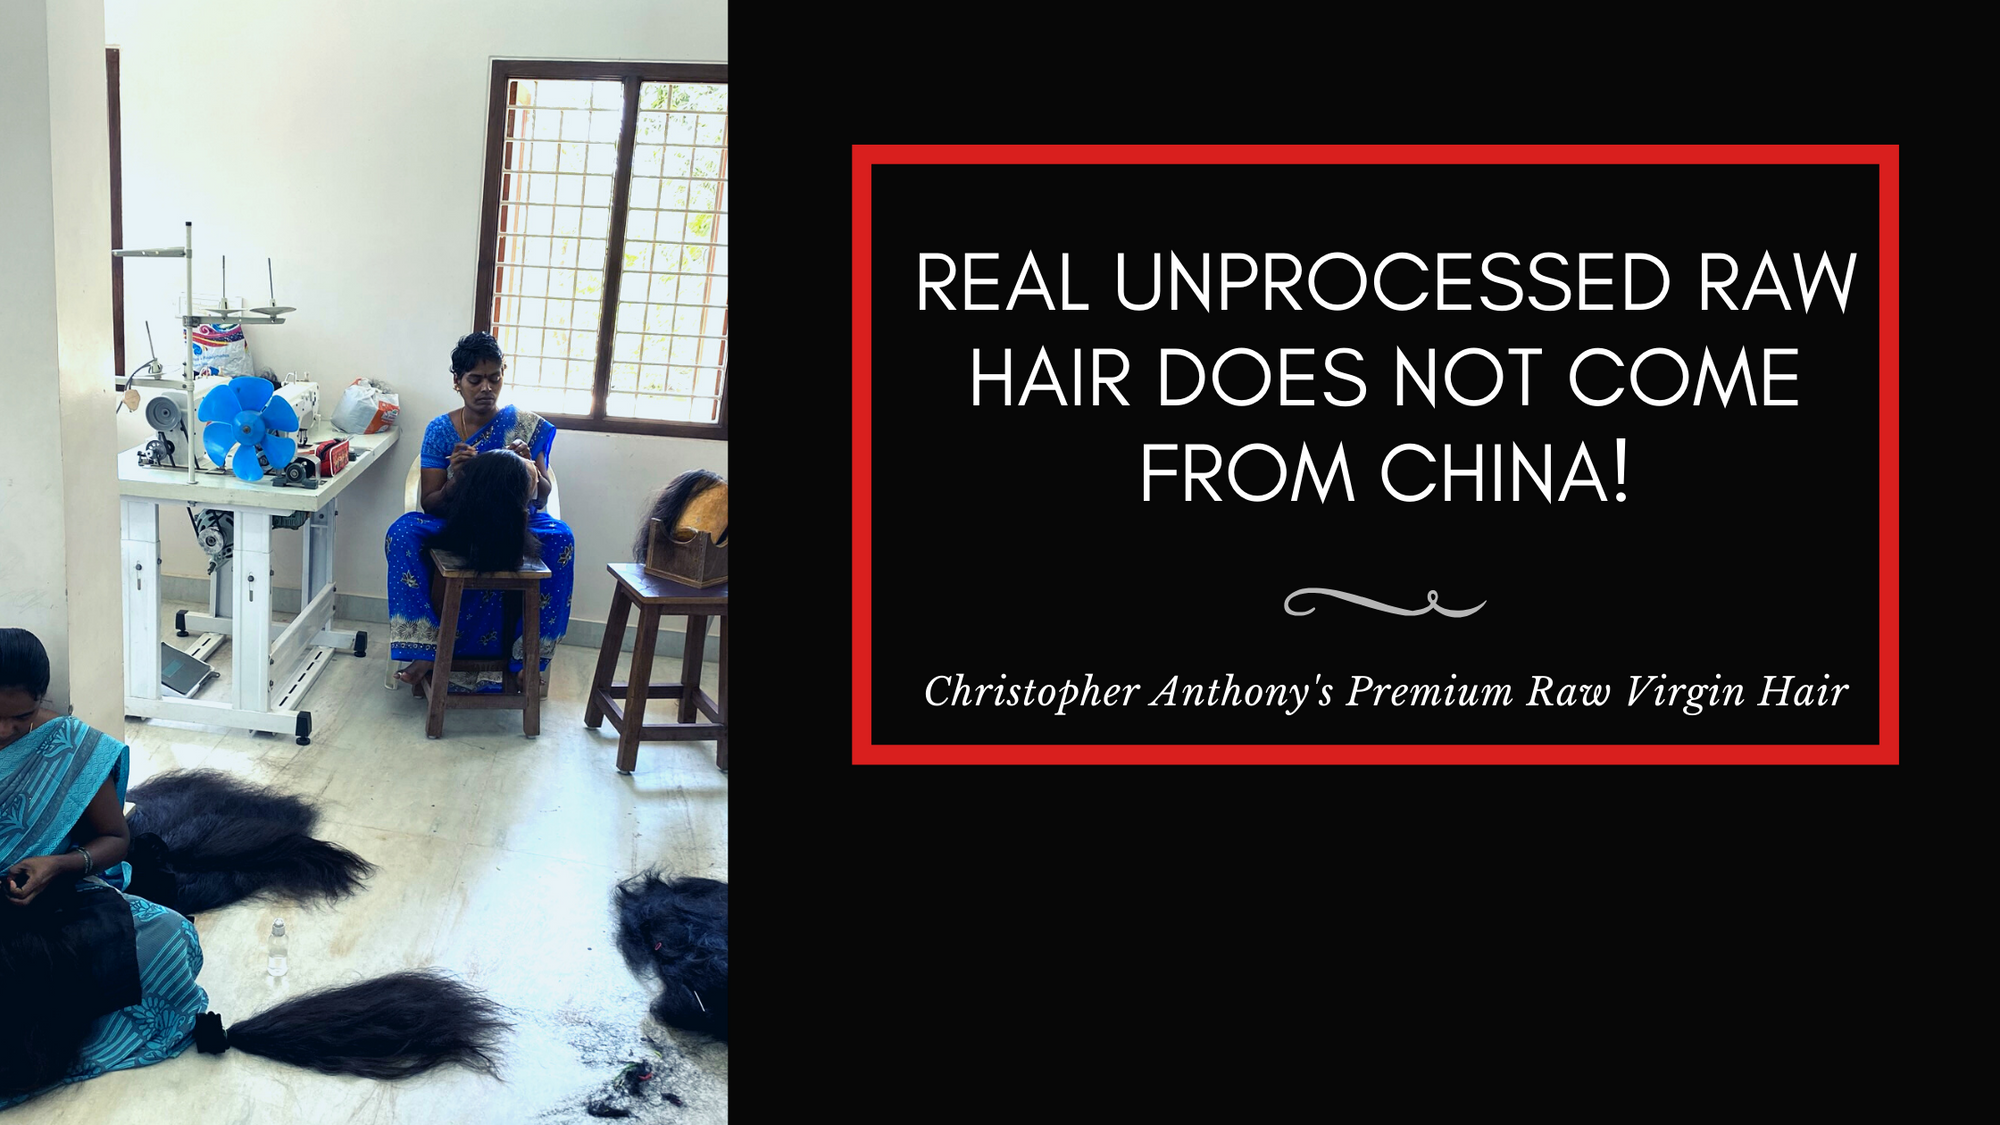 Real unprocessed raw hair does not come from China!